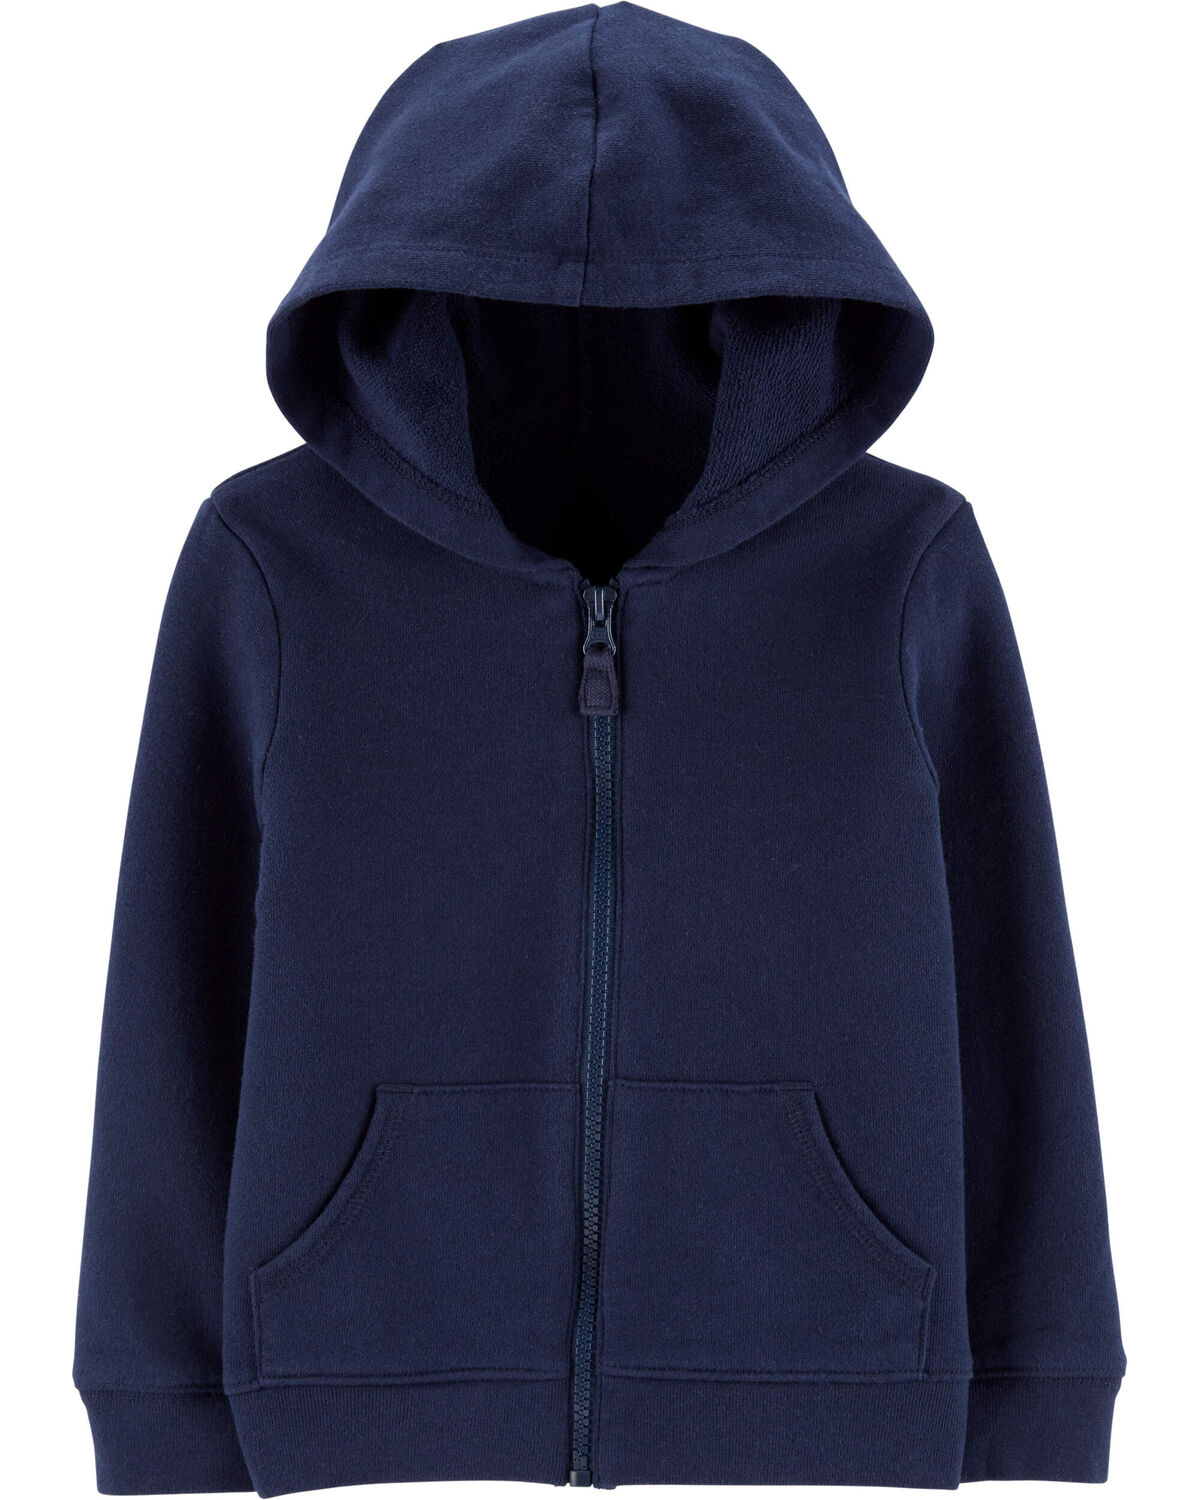 Navy Toddler Zip-Up French Terry Hoodie | carters.com